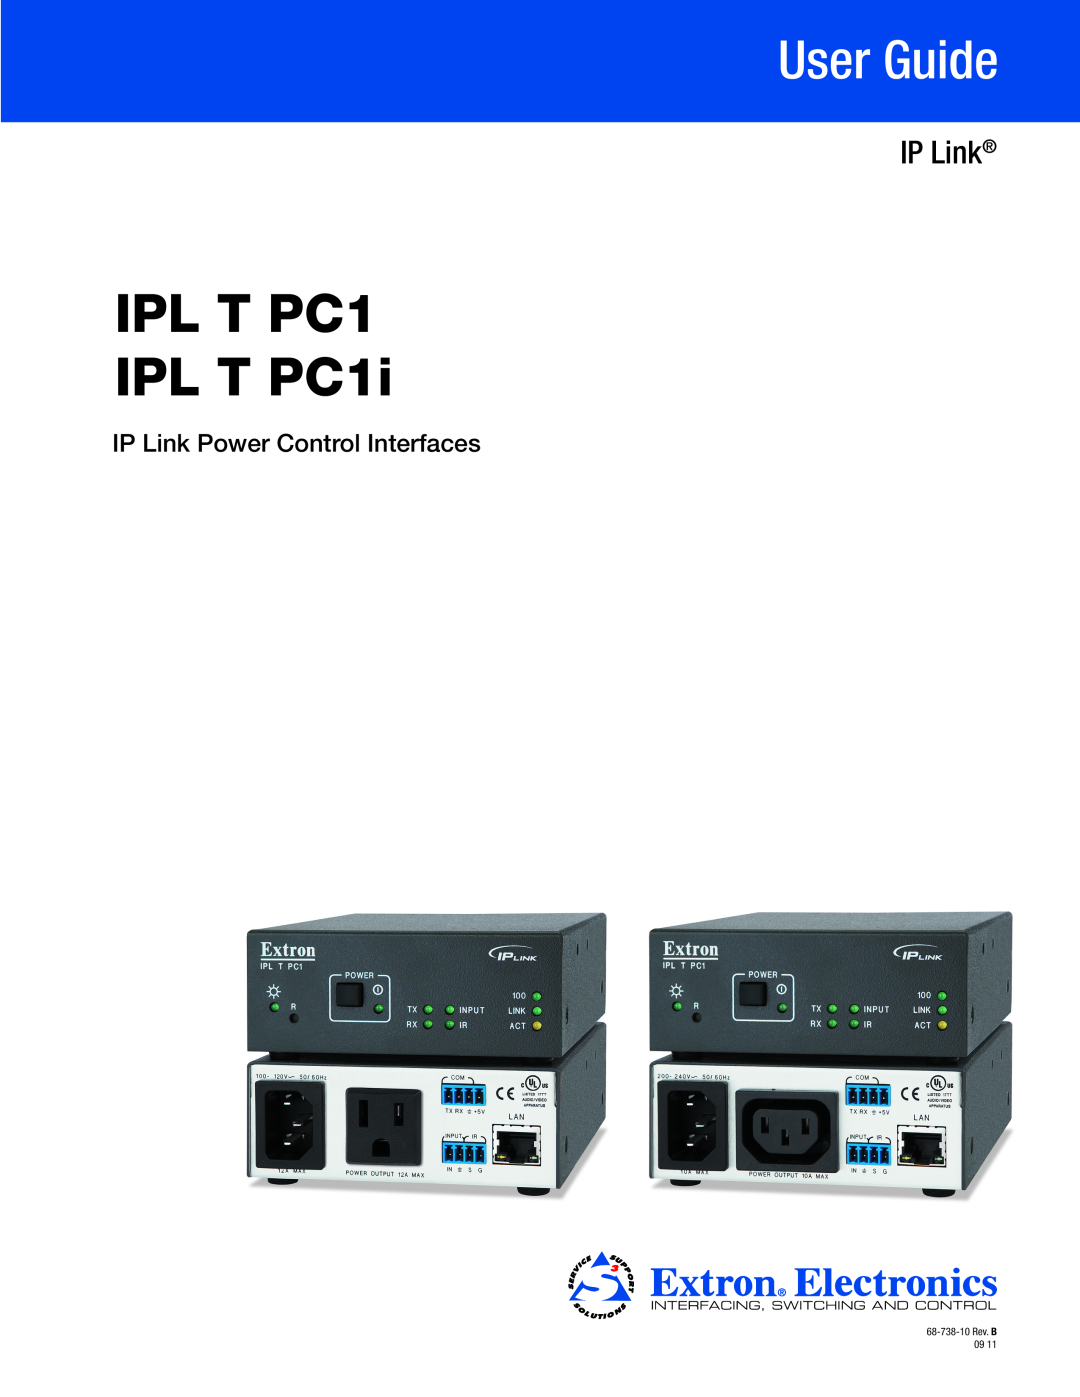 Extron electronic manual IPL T PC1 IPL T PC1i, User Guide, IP Link Power Control Interfaces, 68-738-10 Rev. B 